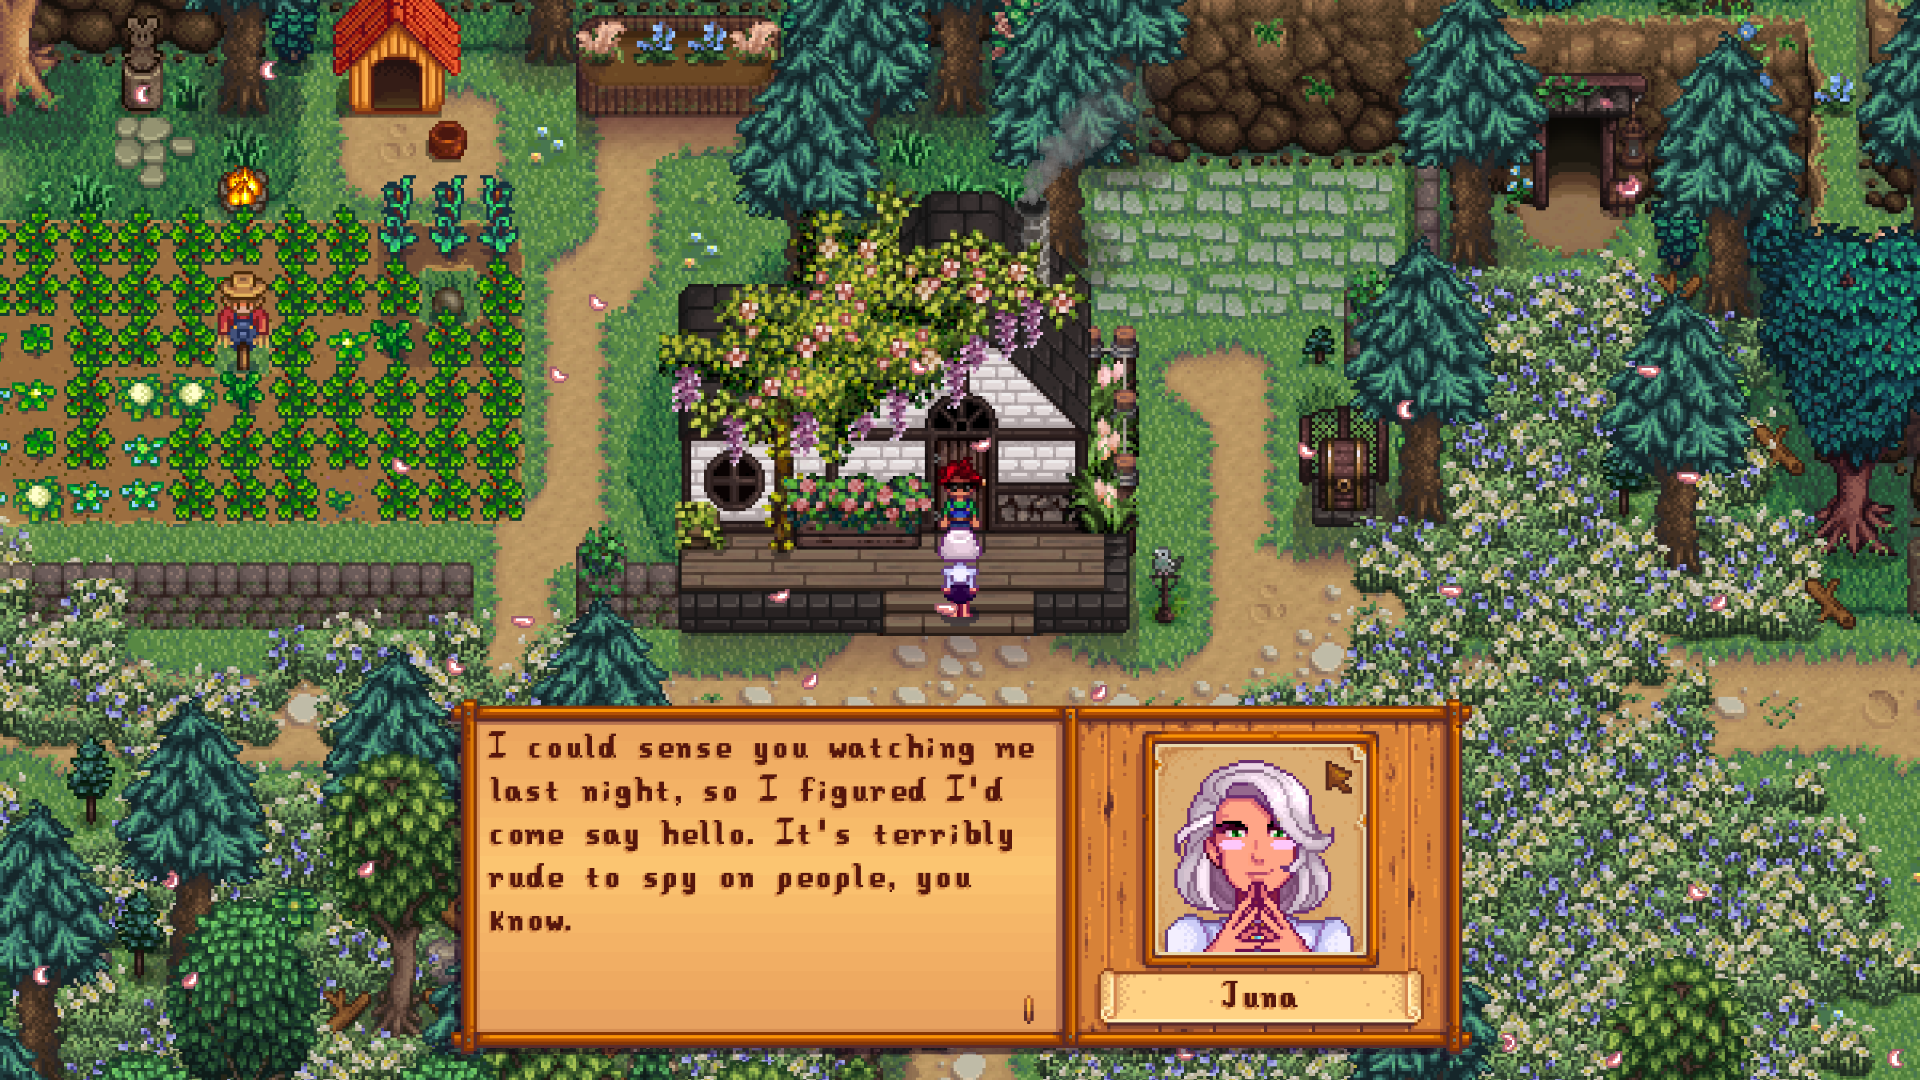 True Love Valley - A Romance Dialogue Expansion Pack at Stardew Valley  Nexus - Mods and community